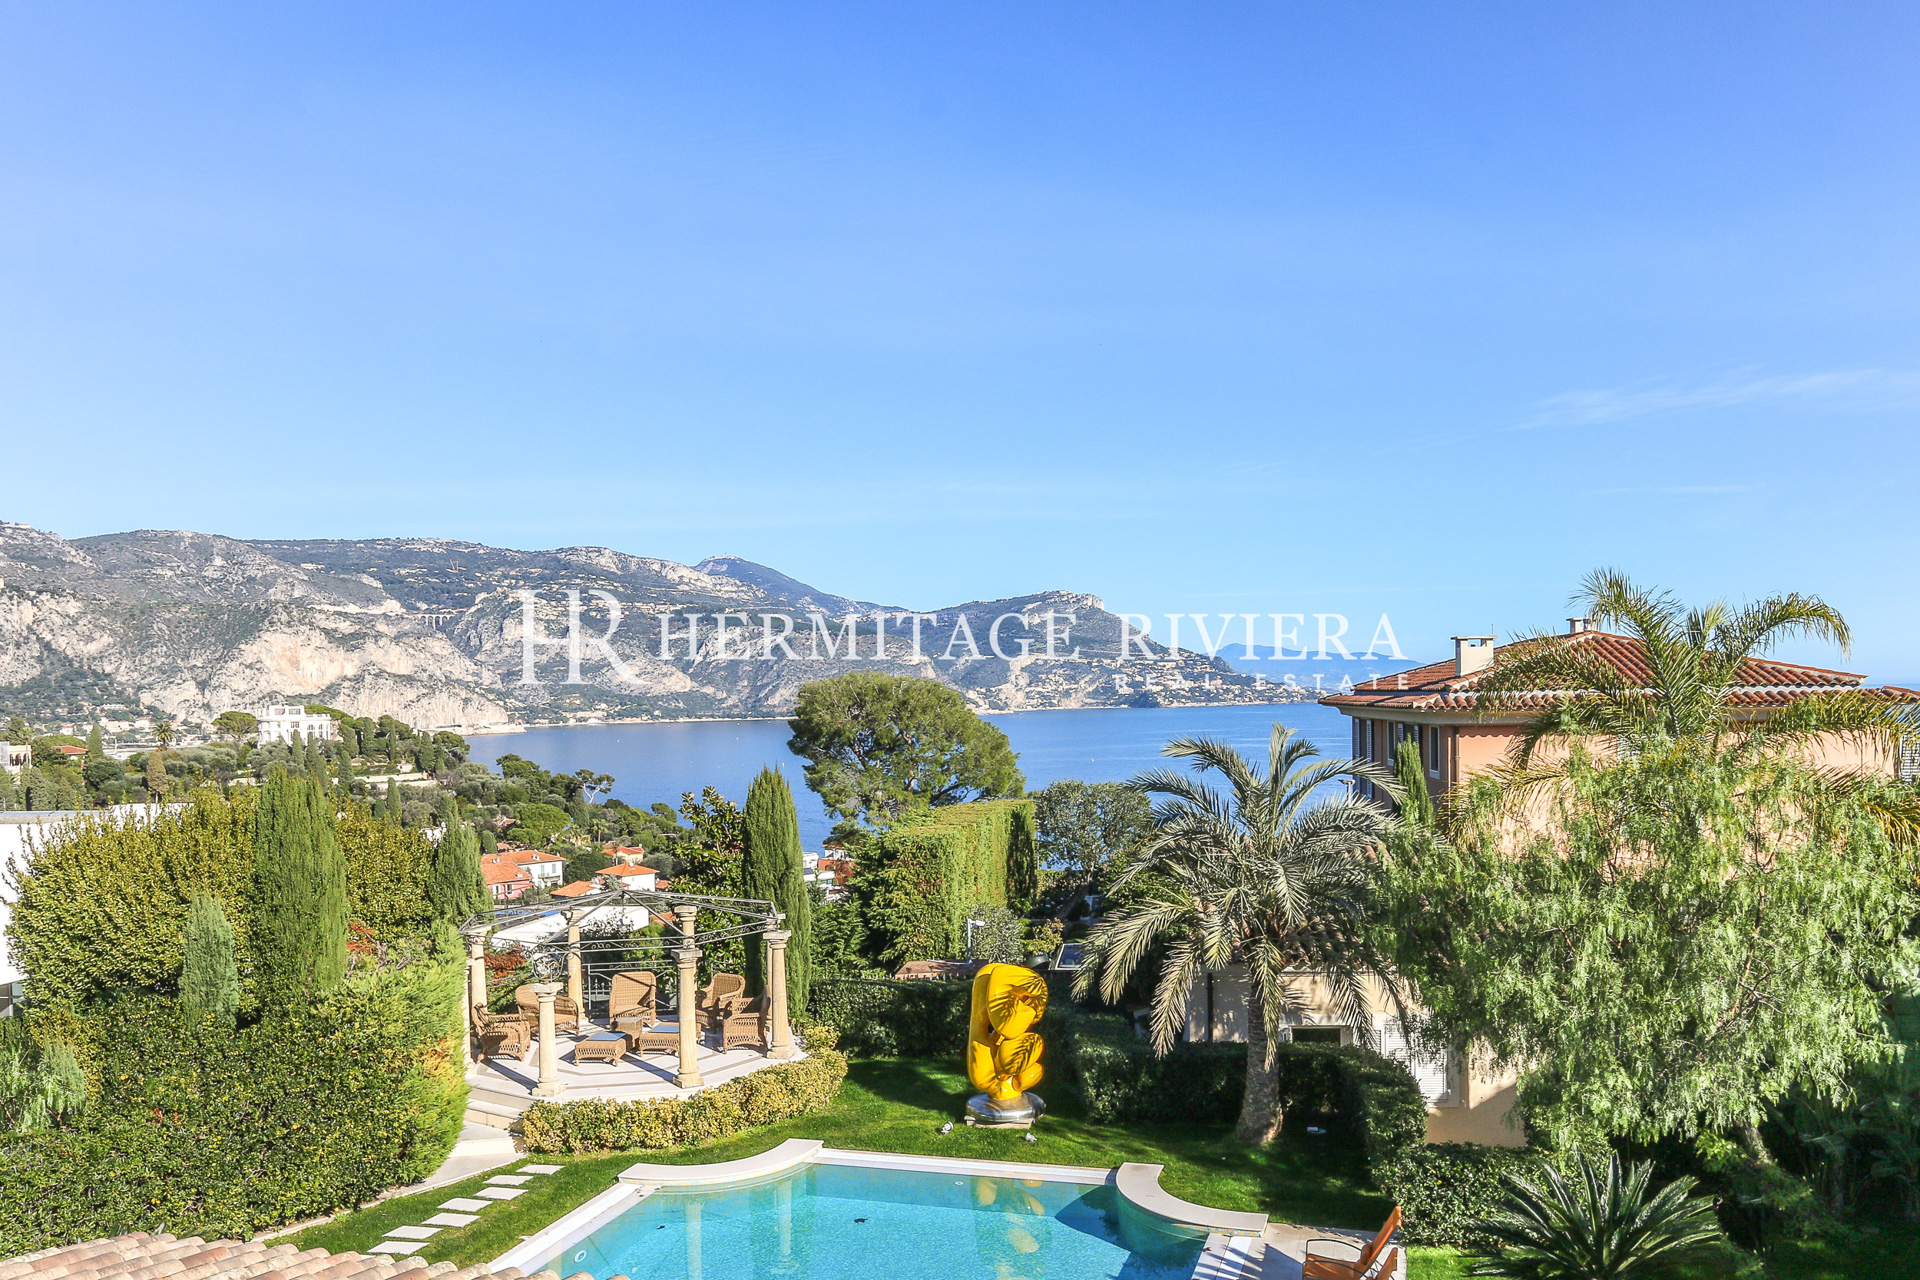 Superb villa close to the village with panoramic views (image 23)